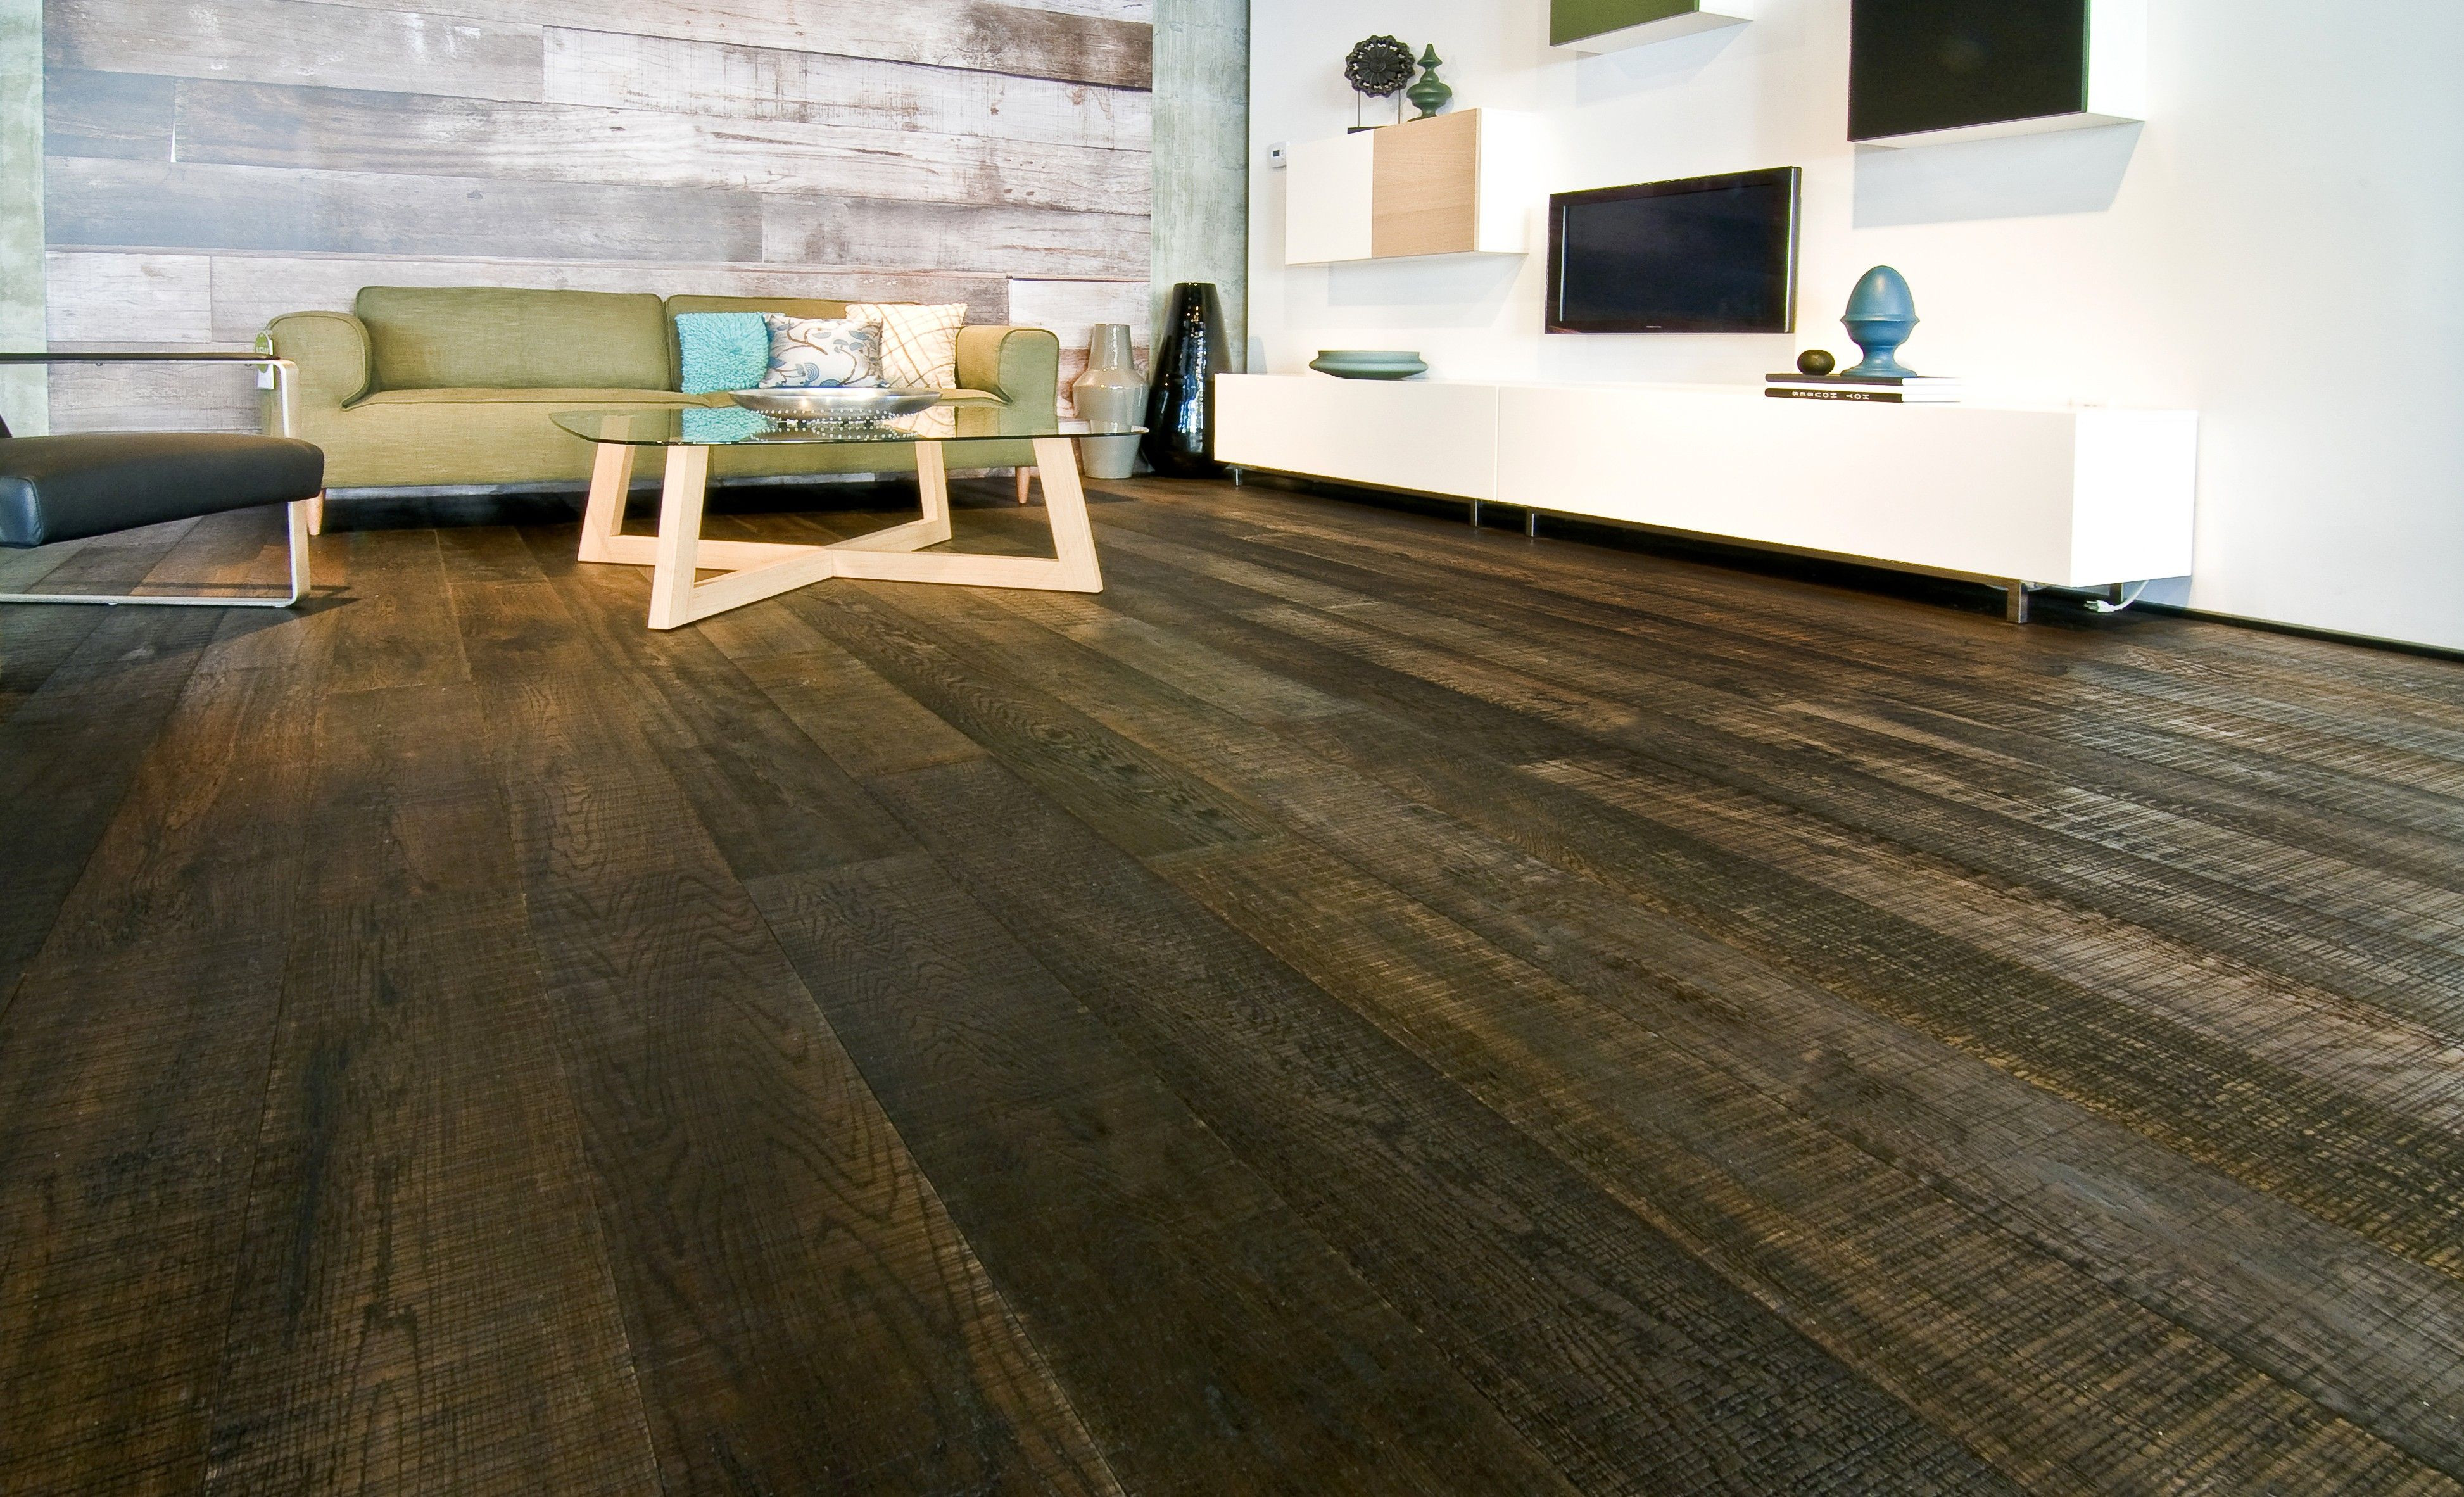 14 Best Hardwood Floor Transition Ideas 2024 free download hardwood floor transition ideas of 40 best place to buy wood flooring ideas for where to buy hardwood flooring inspirational 0d grace place barnegat inspiration of best place to buy wood flo